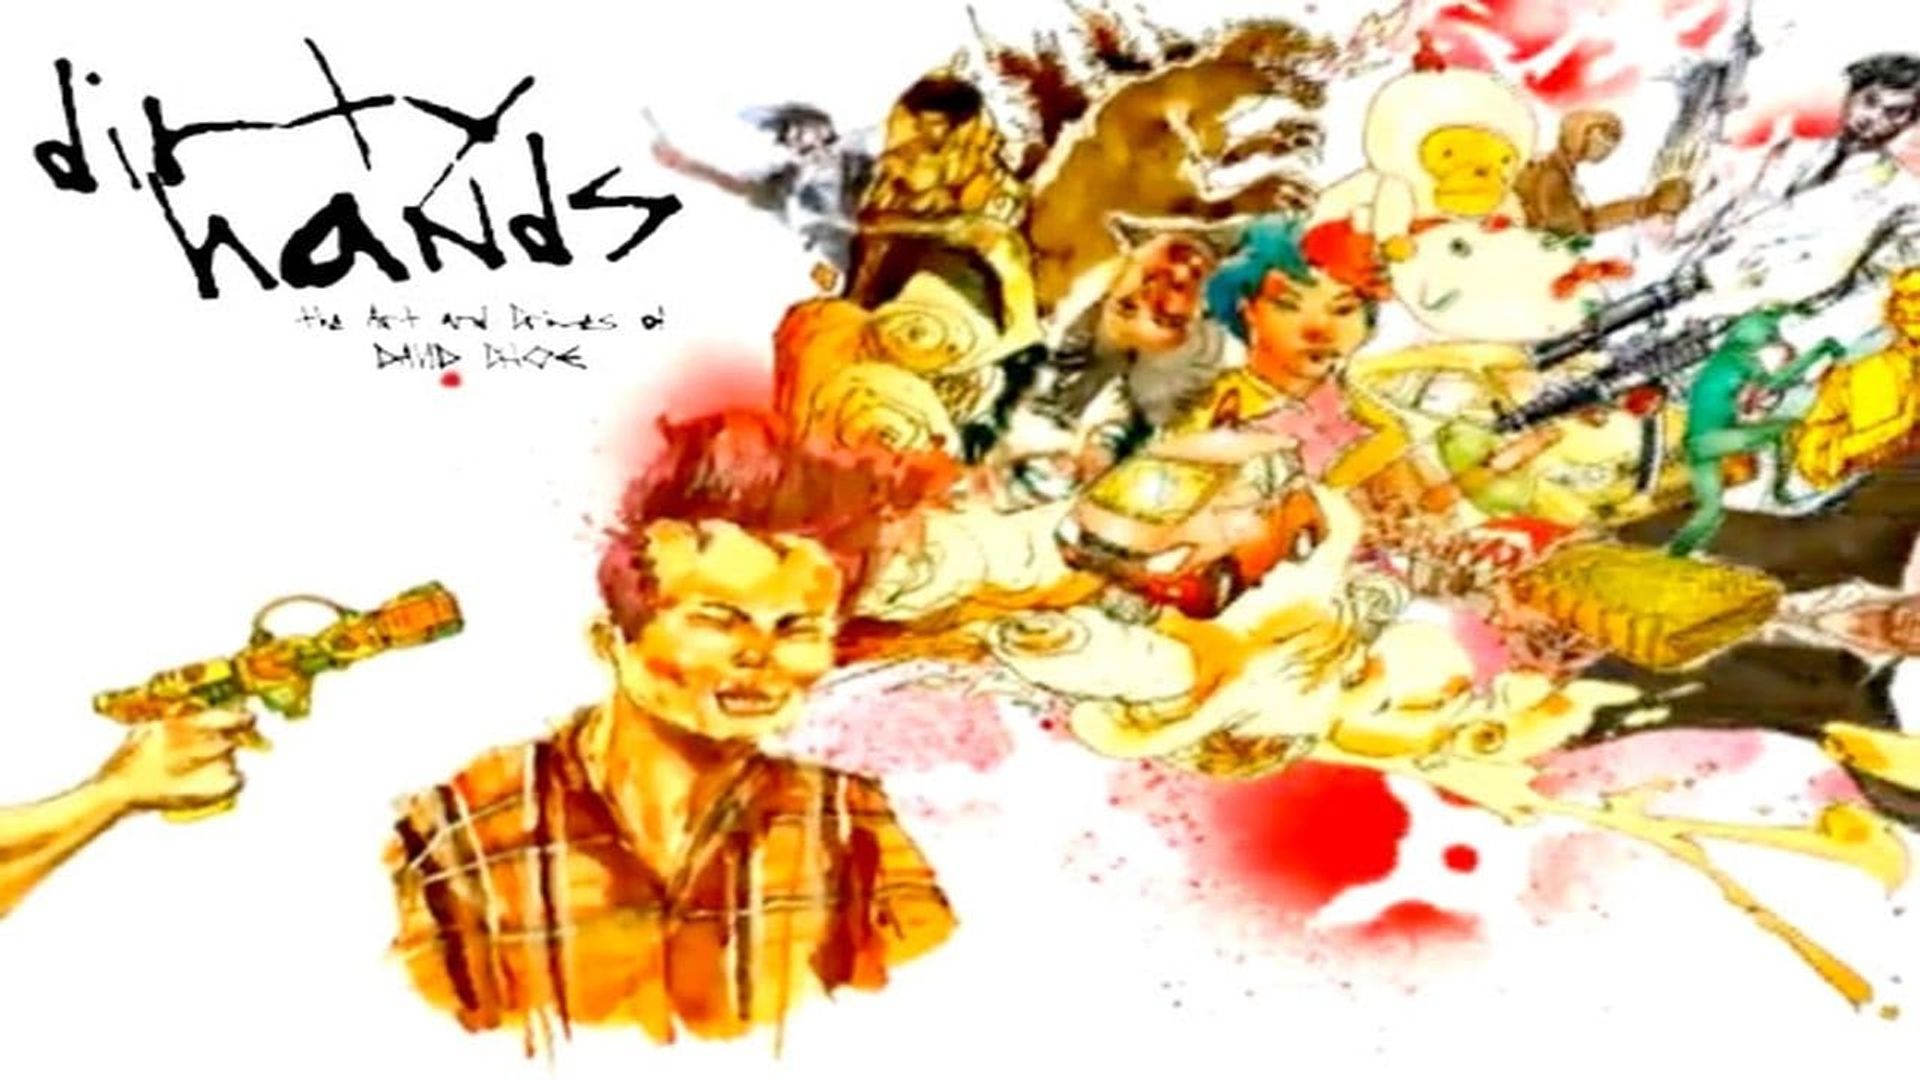 Dirty Hands: The Art and Crimes of David Choe background